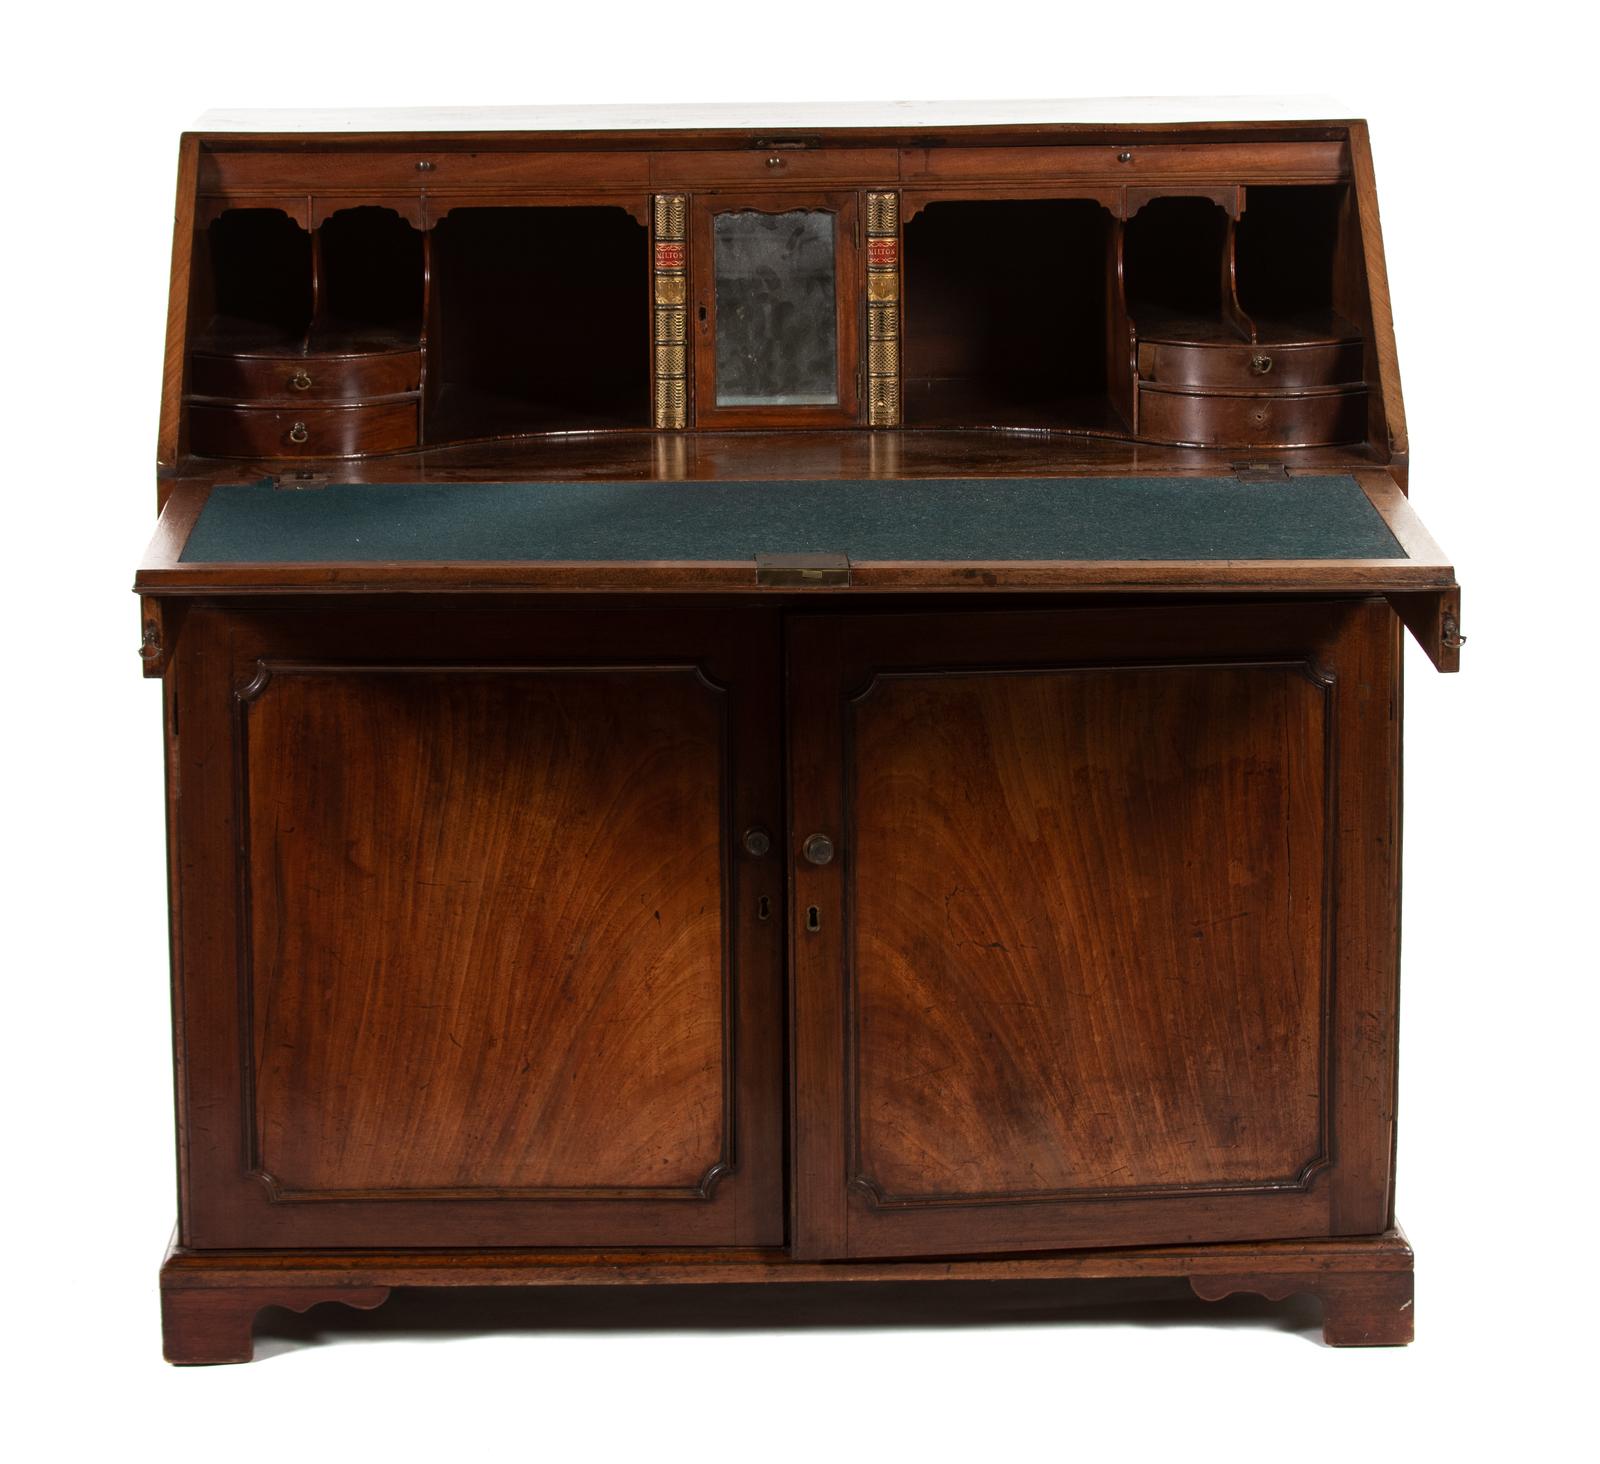 A George III mahogany slant-front desk
Third quarter of the 18th century
the rectangular top above a slant front enclosing drawers and fitted compartments, over a long drawer above a pair of cupboard doors enclosing two later sliding shelves,